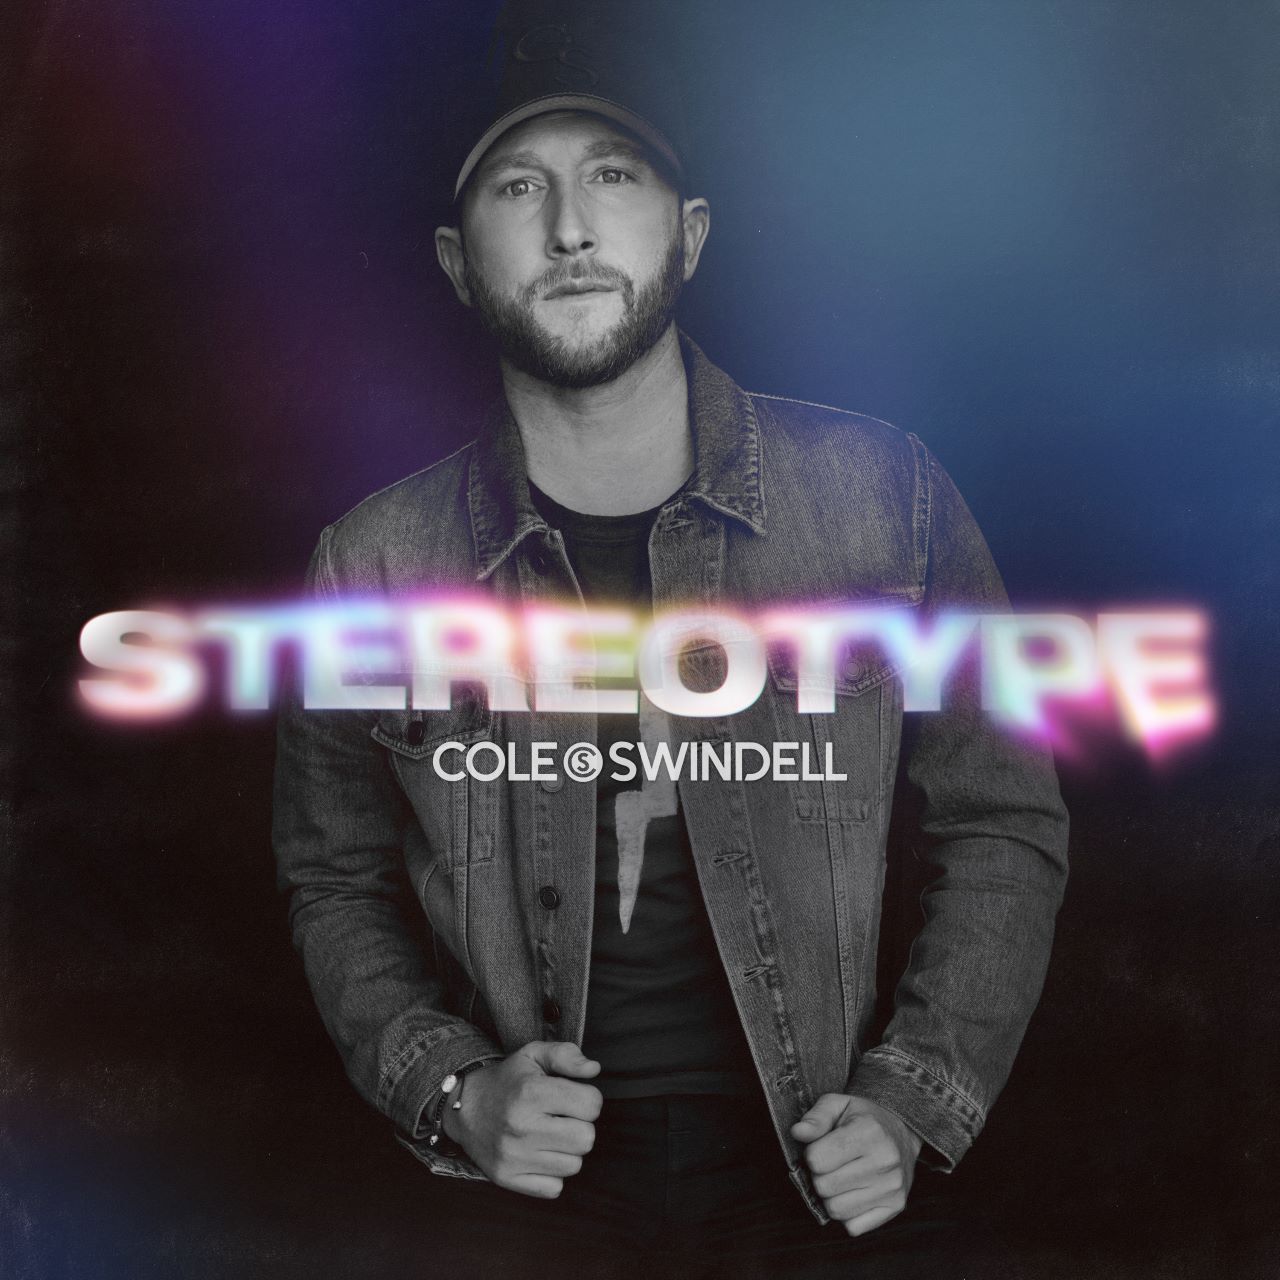 Cole Swindell – “Stereotype” cover album